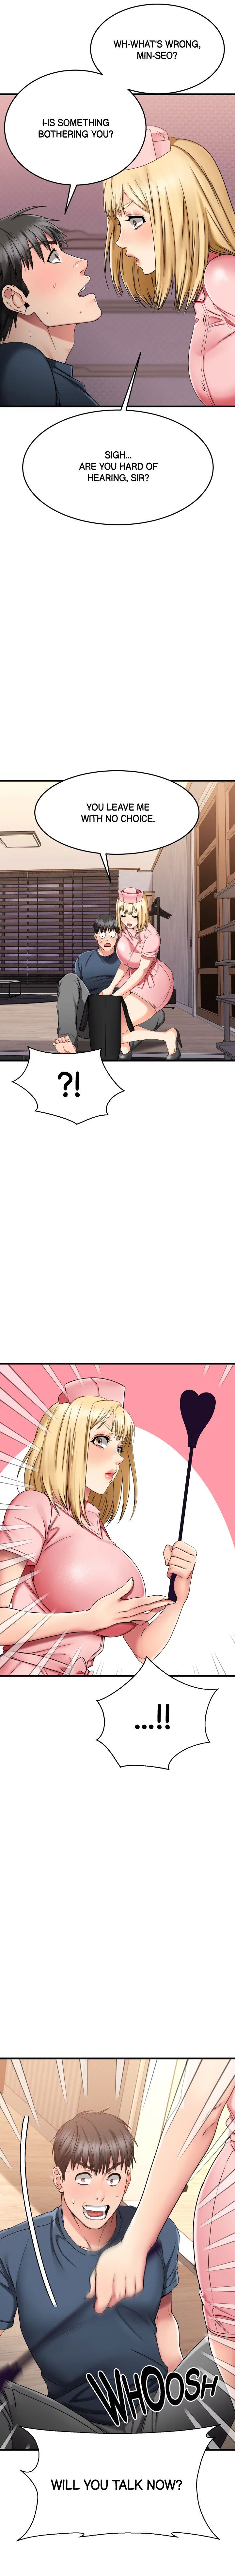 my-female-friend-who-crossed-the-line-chap-30-11